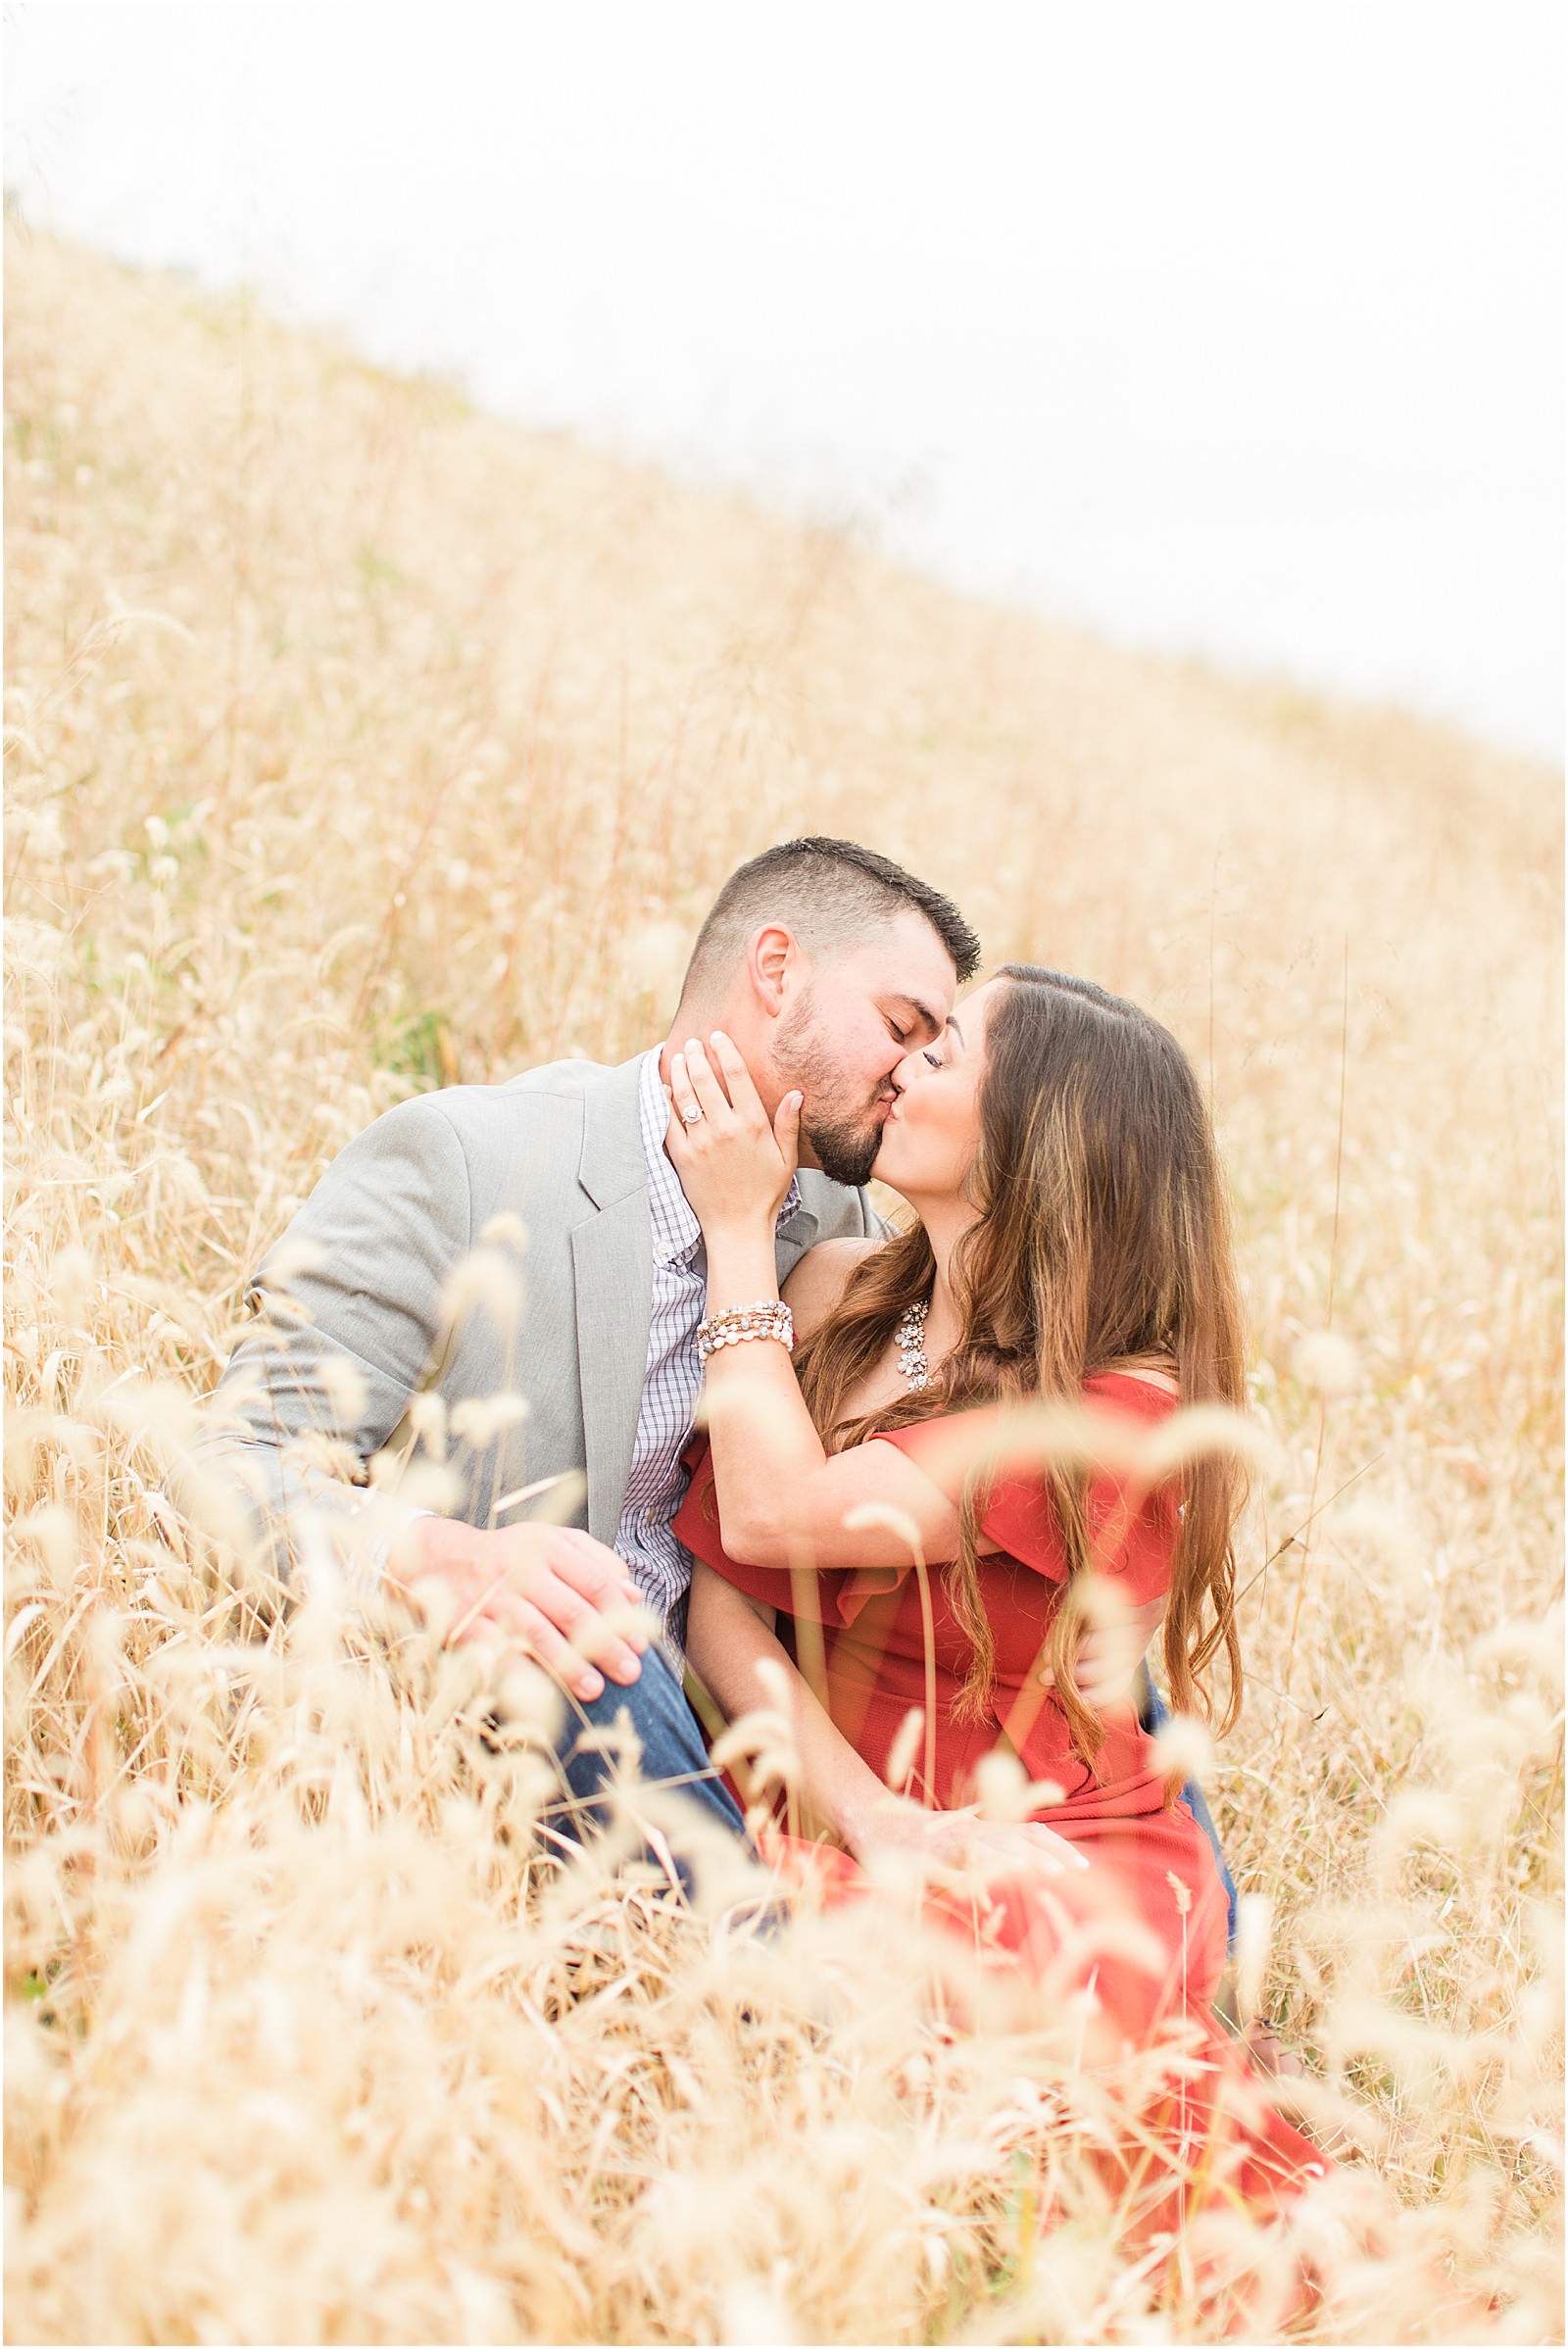 A Fall Oliver Winery Engagement Session | Sally and Andrew | Bret and Brandie Photography 0037.jpg